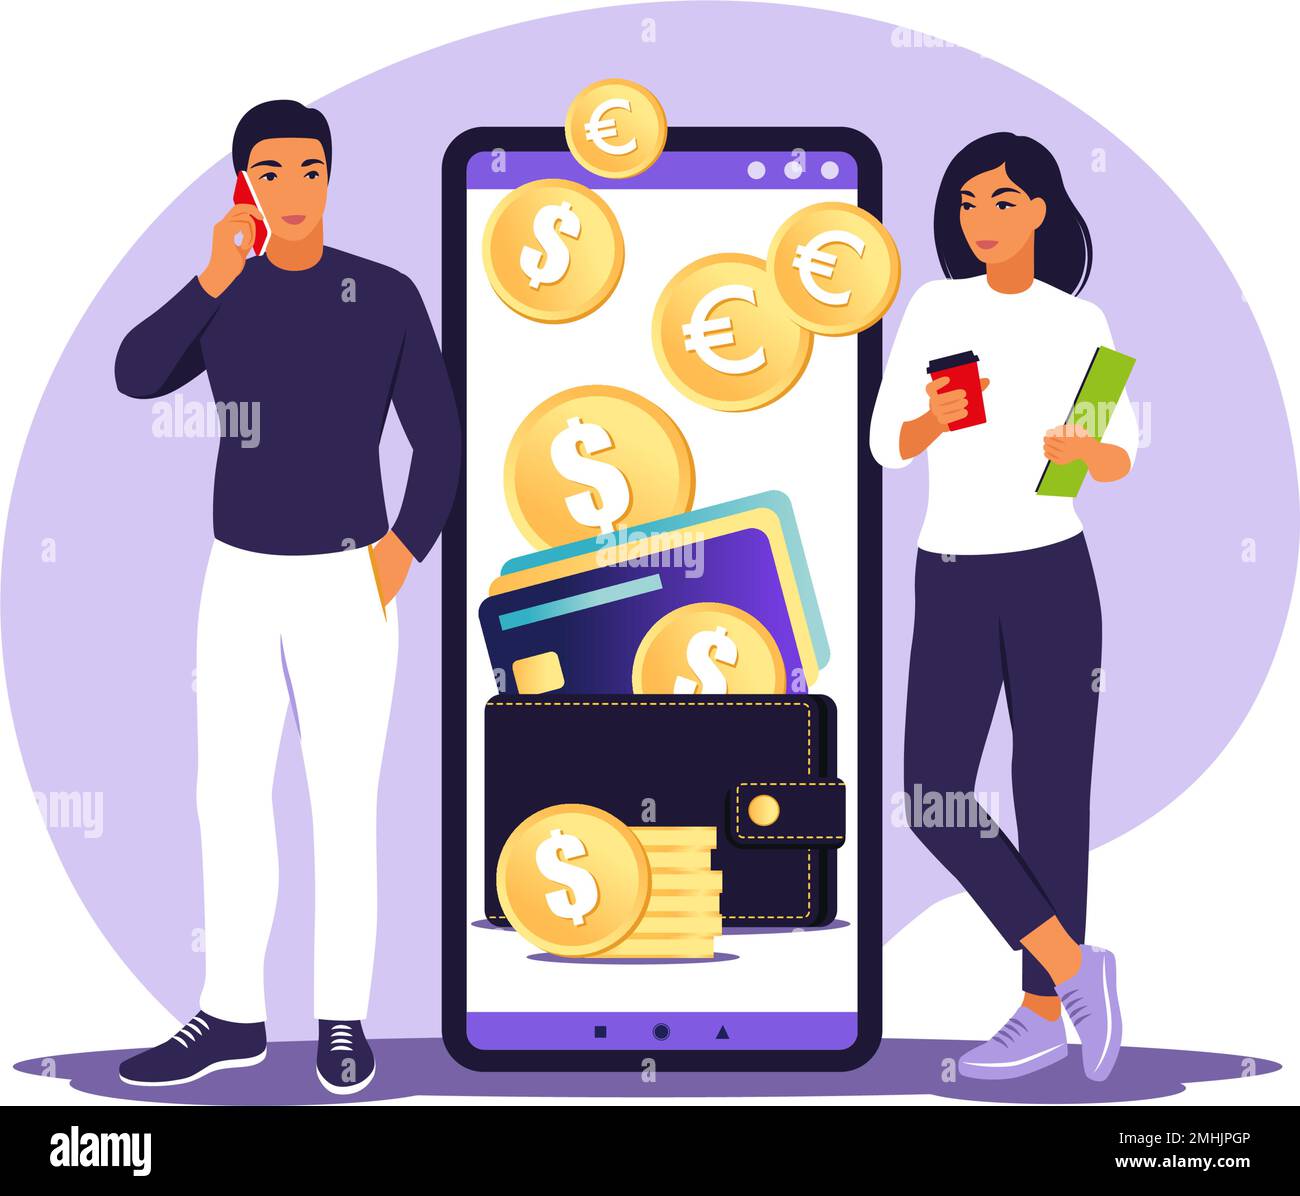 Digital wallet concept. Young people pays card using mobile payment. Vector illustration. Flat. Stock Vector